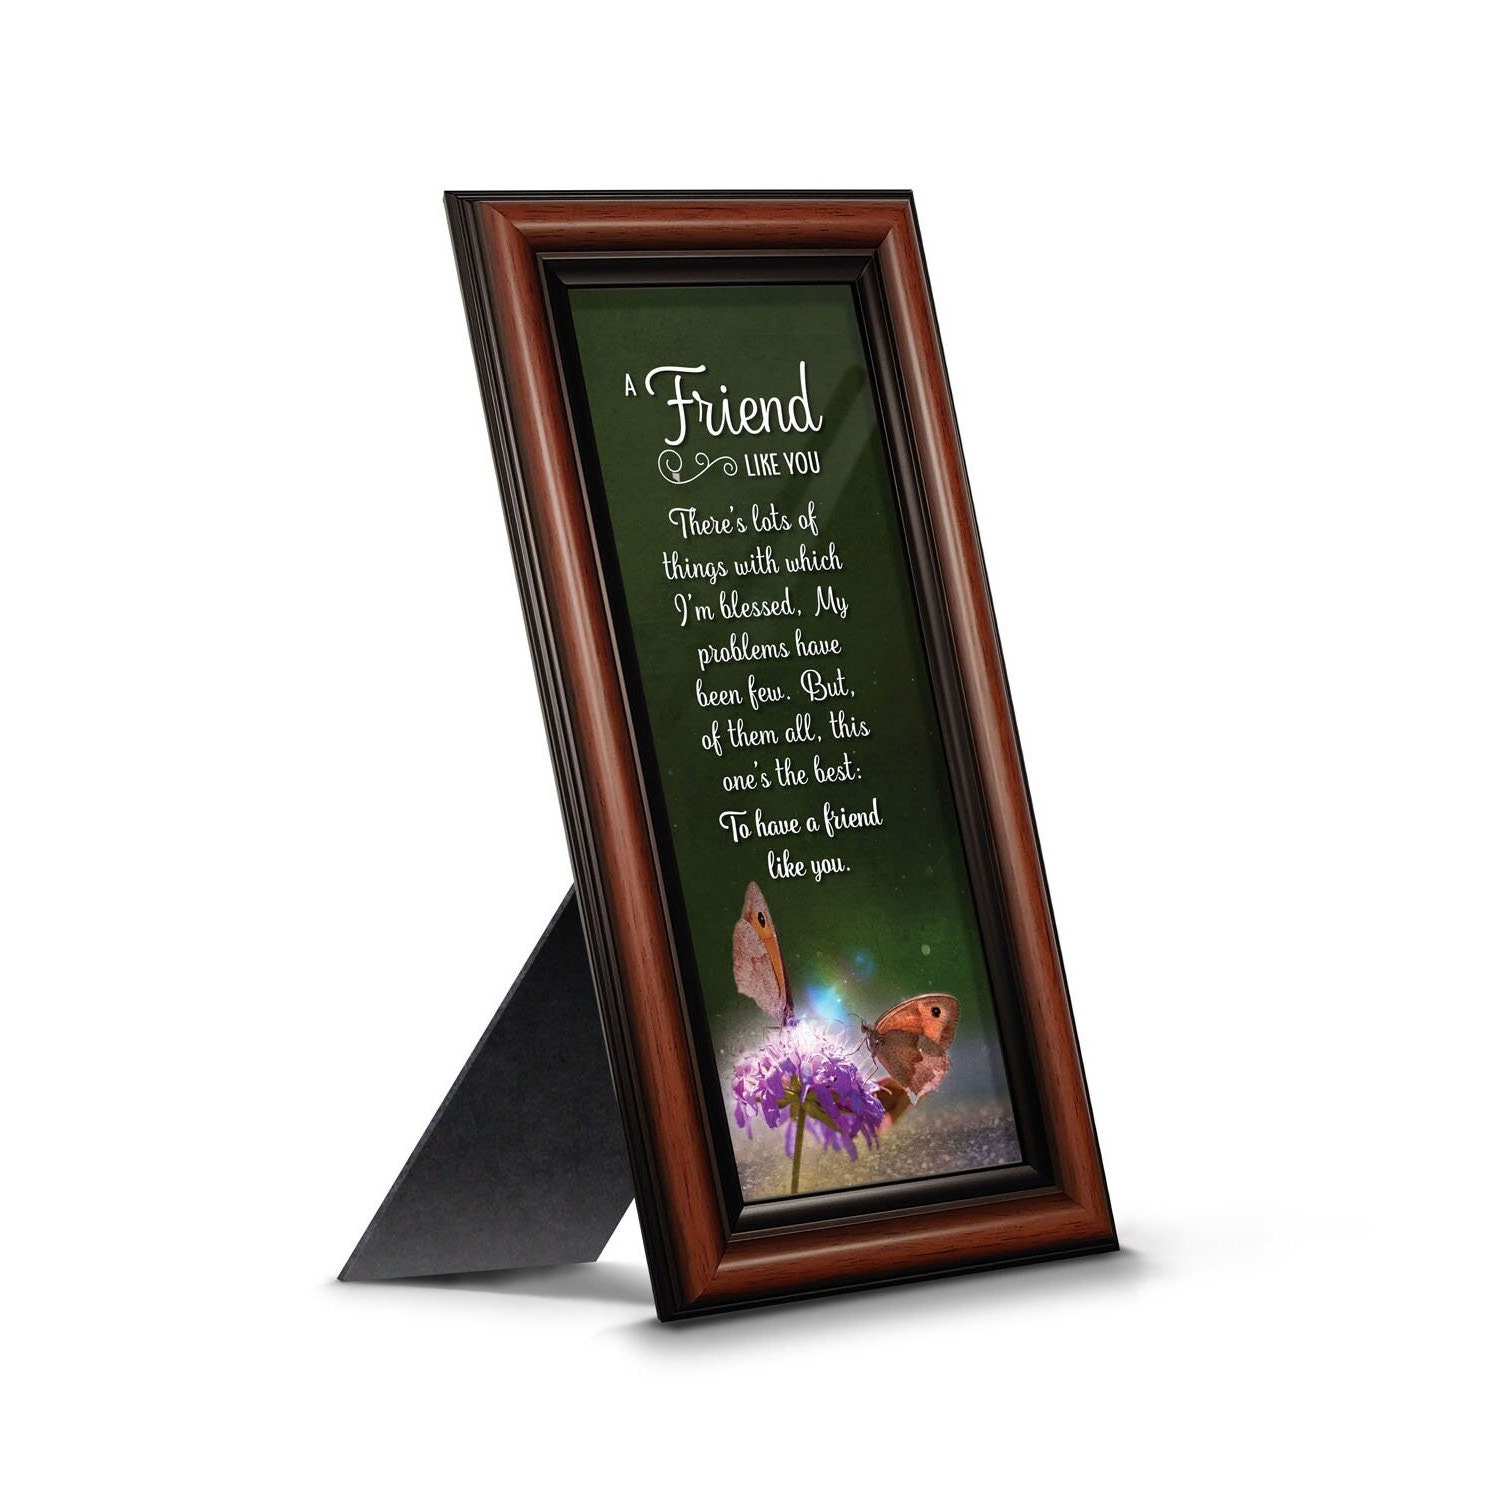 A Special Friend, Poem About Friendship, Picture Frame 10x10 6309